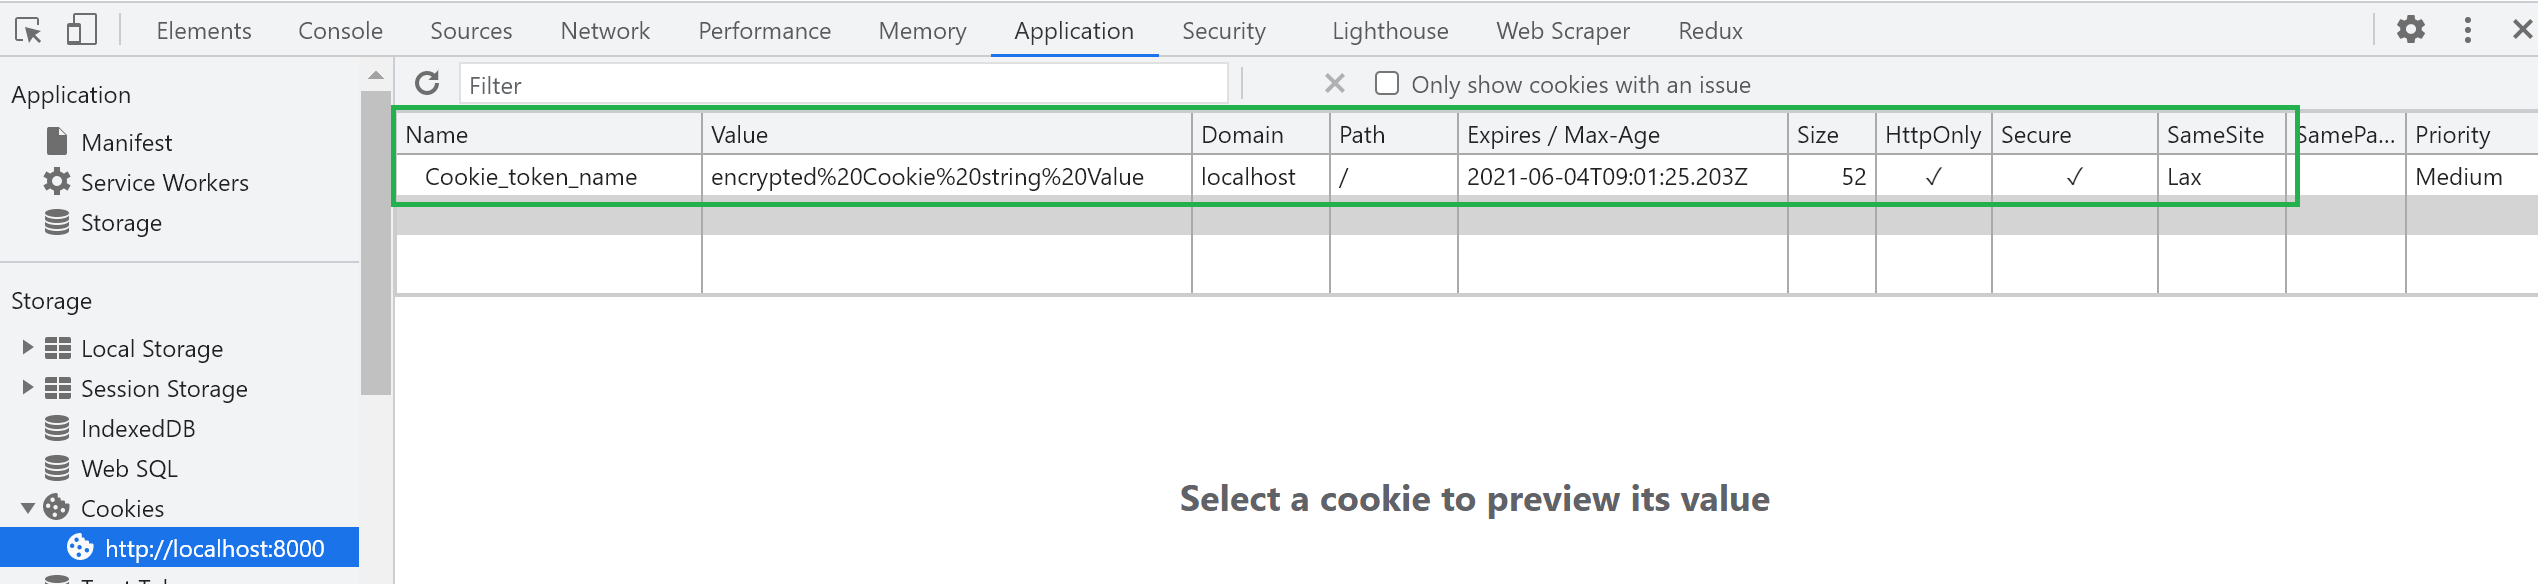 Cookies updated security values